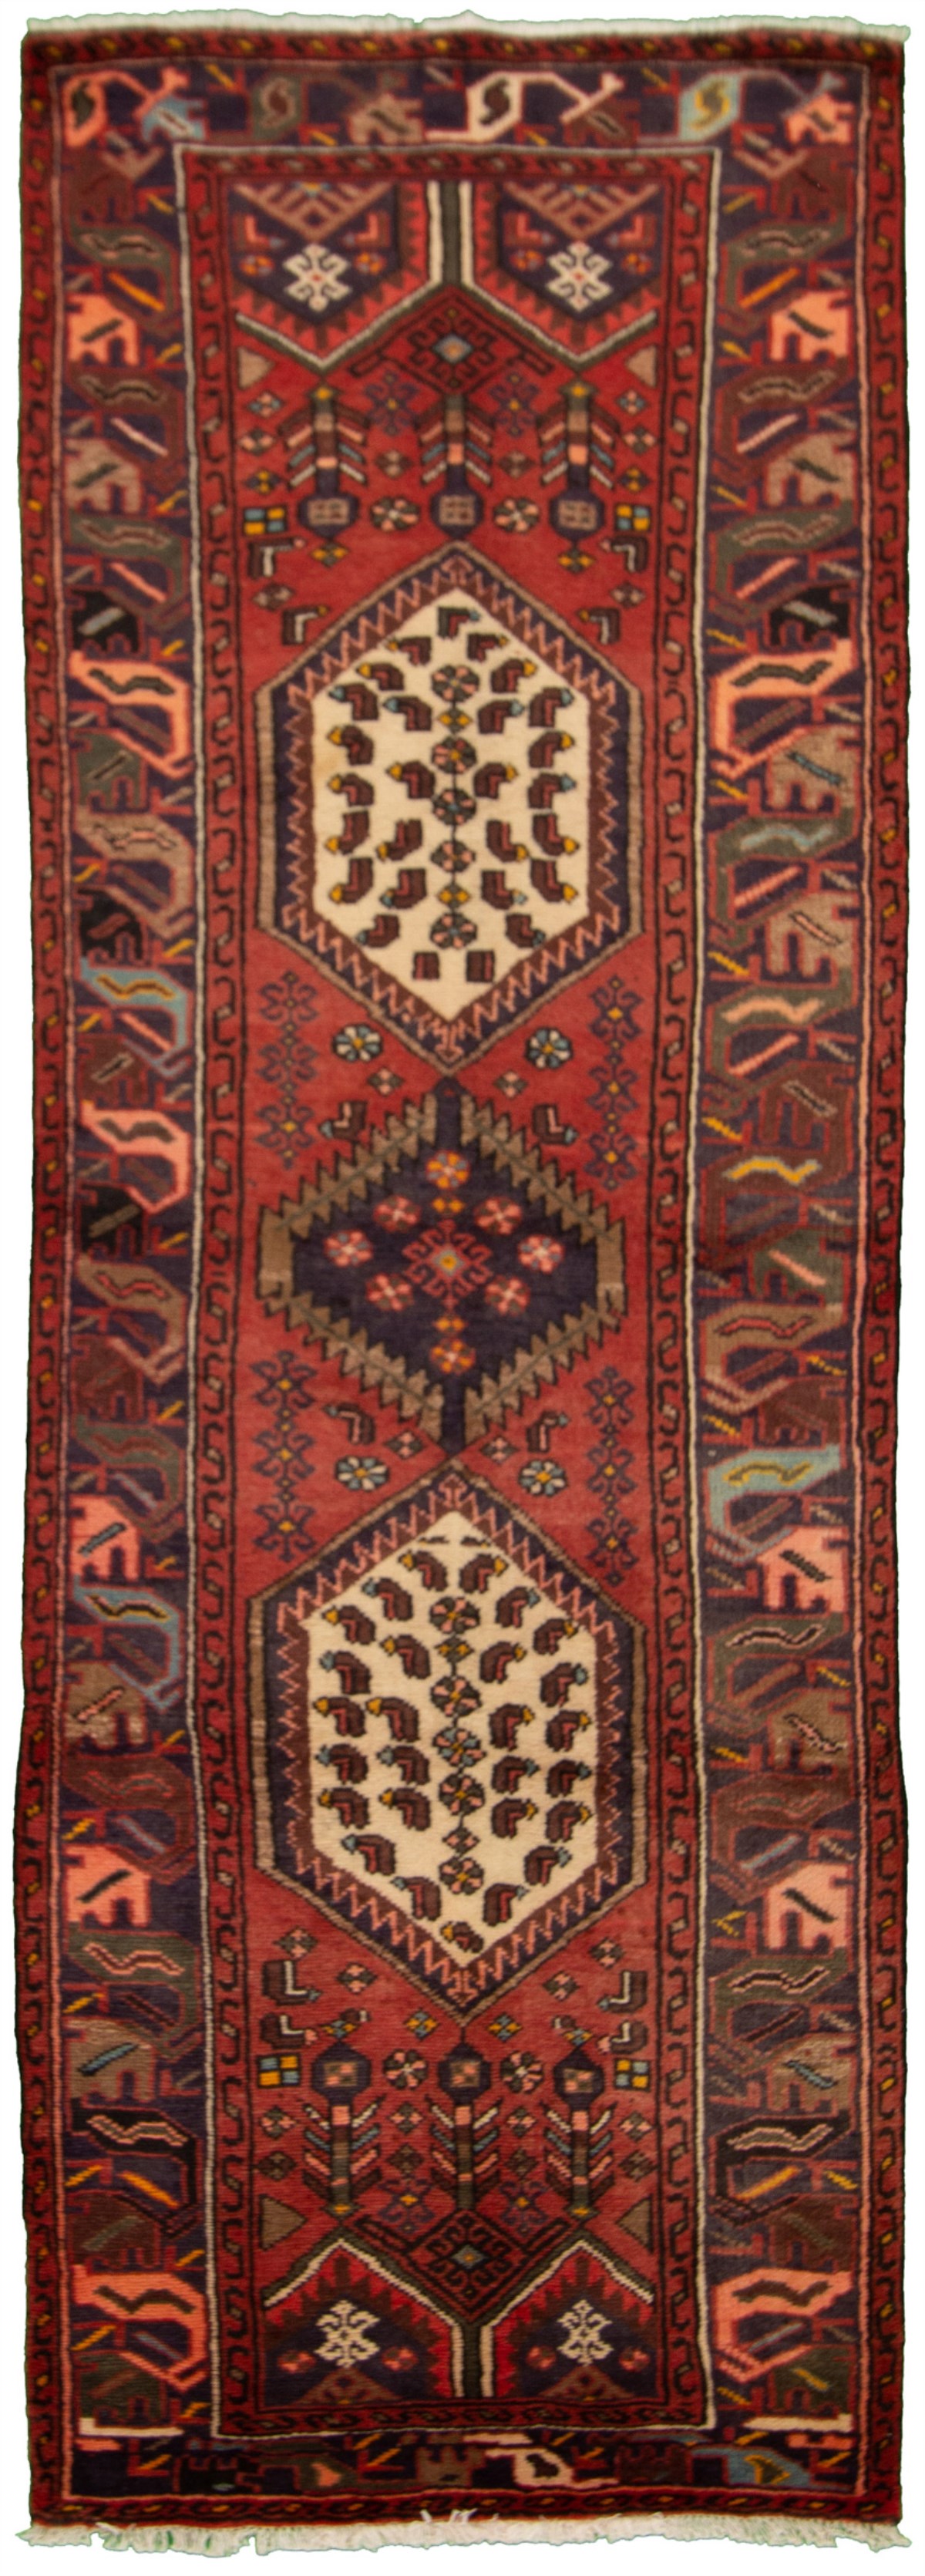 Hand-knotted Hamadan Red Wool Rug 3'4" x 9'7"  Size: 3'4" x 9'7"  